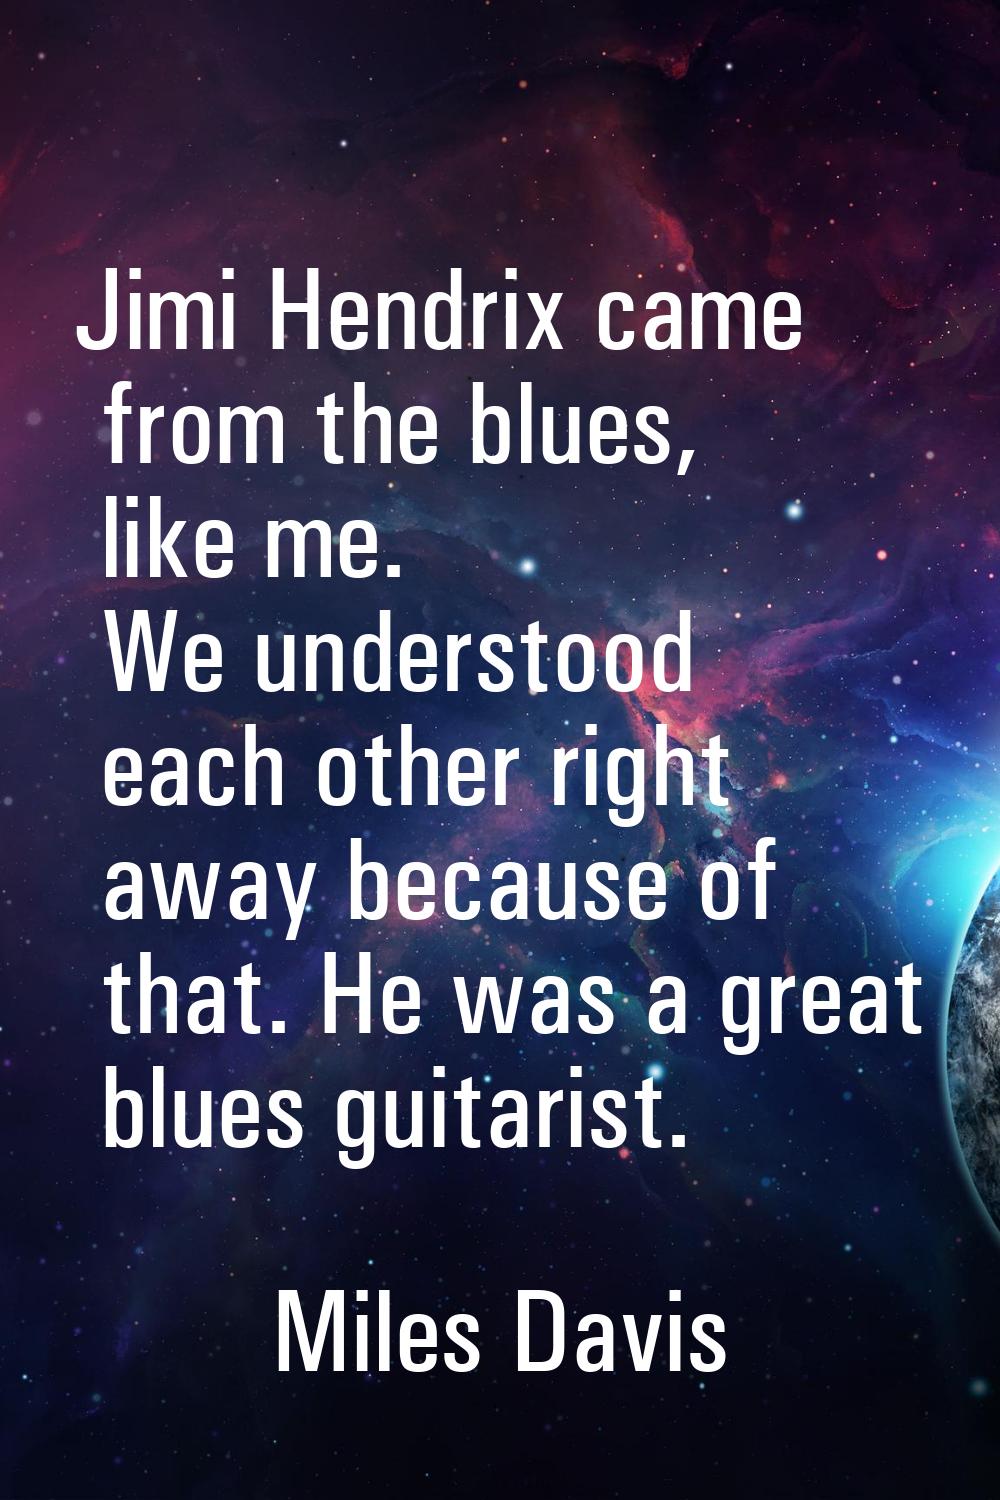 Jimi Hendrix came from the blues, like me. We understood each other right away because of that. He 